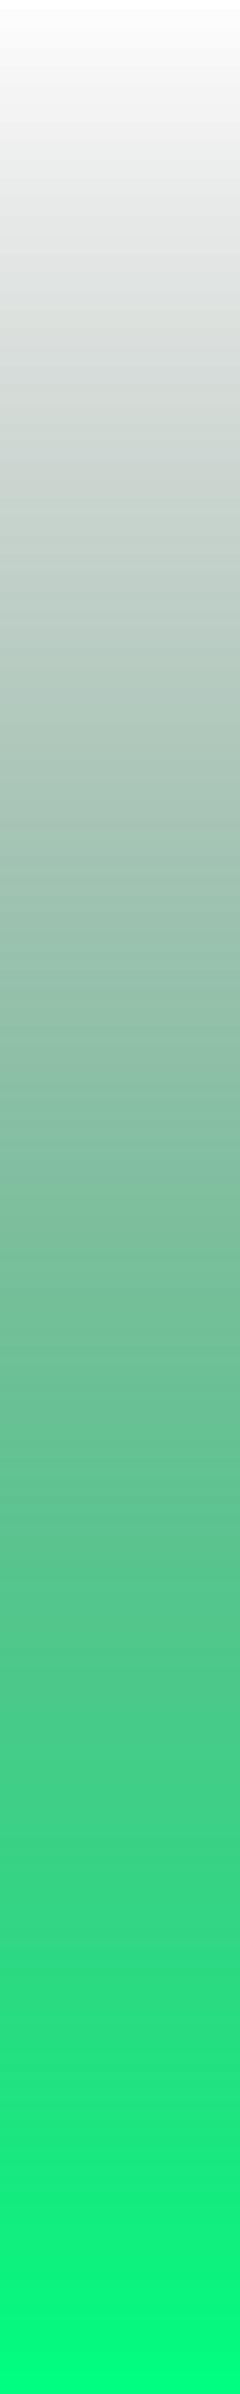 Spring Green Gradient png